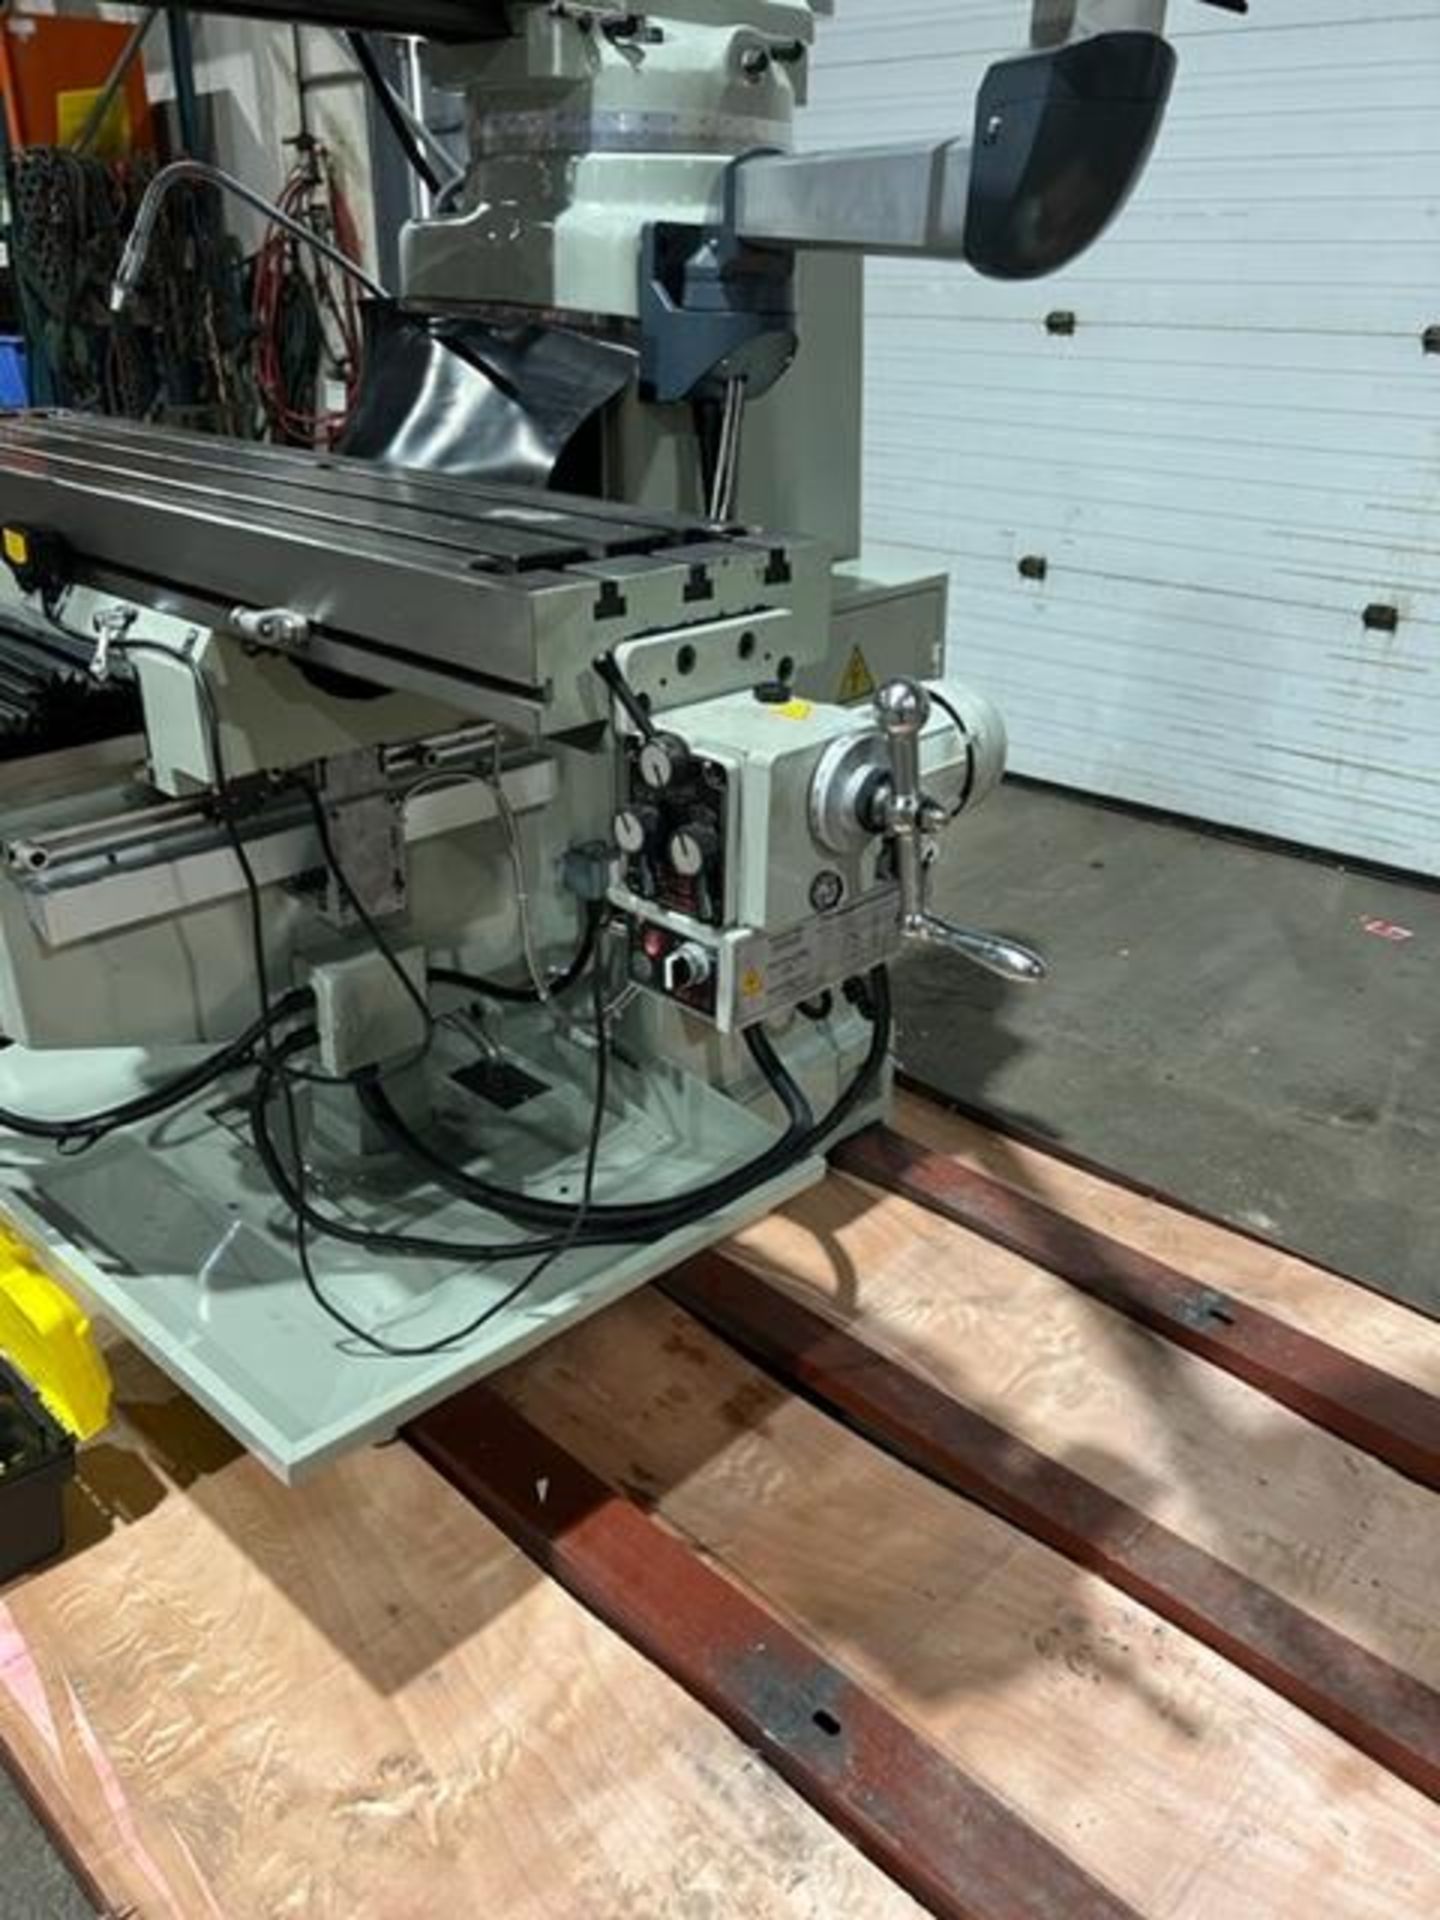 BernardoMach MINT / UNUSED Milling Machine with Full Power Feed Table on ALL AXIS (X, Y and Z) 54" x - Image 6 of 6